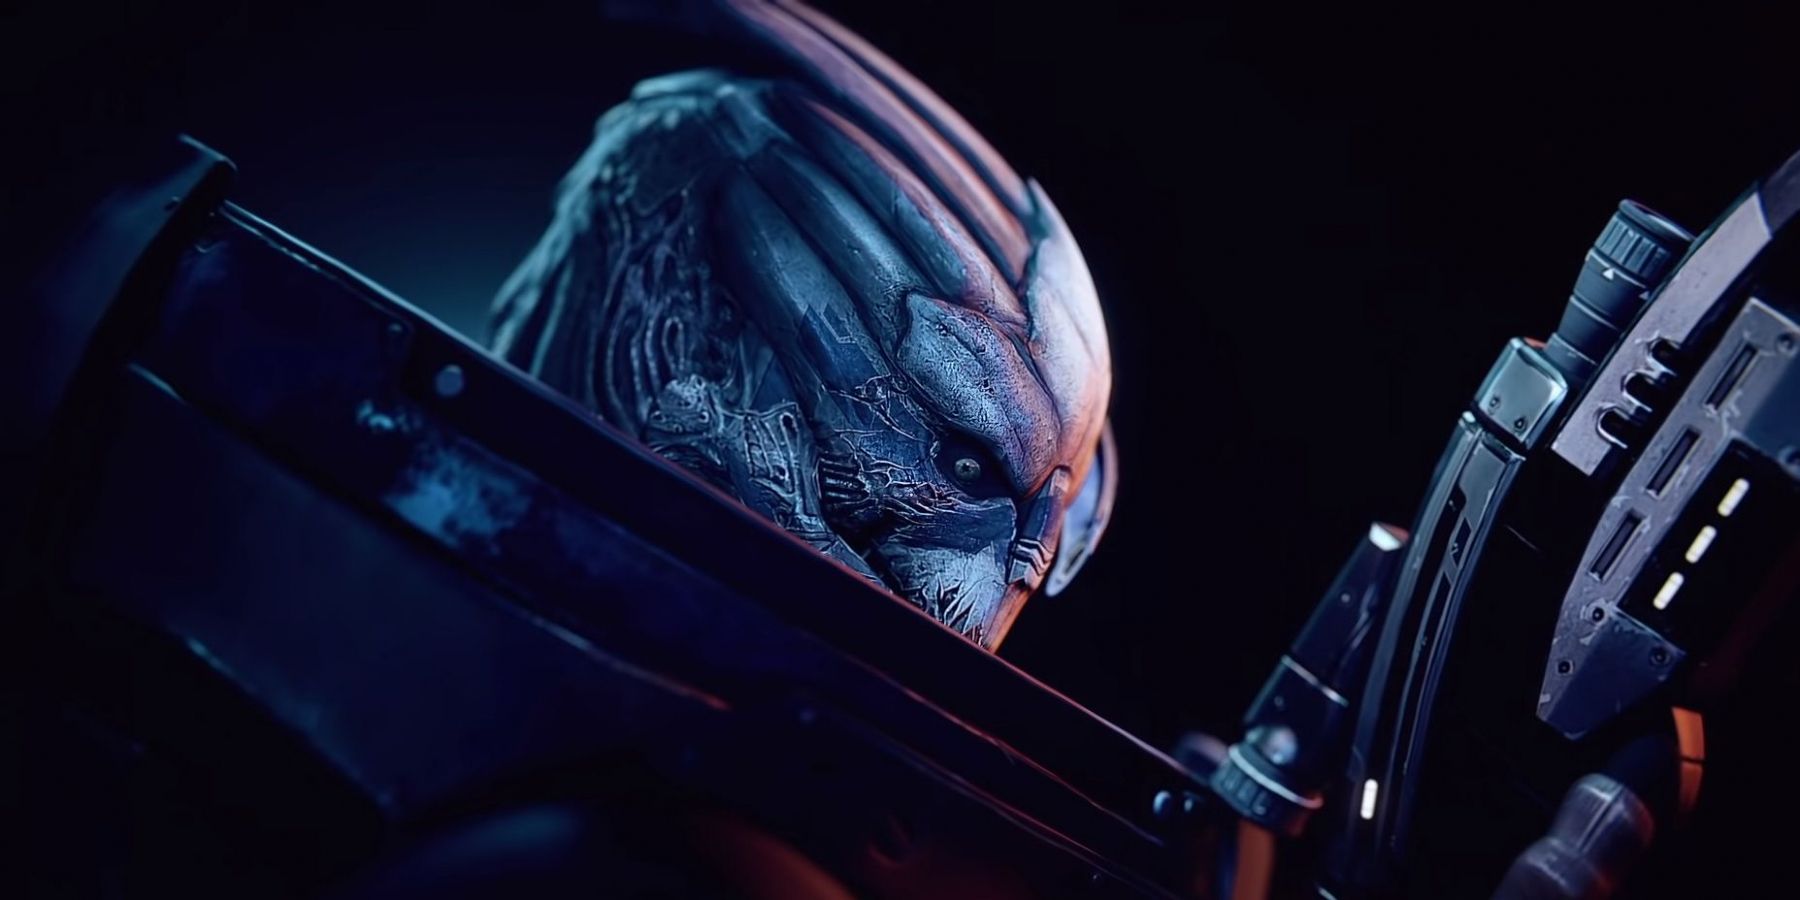 Why Garrus Is The Most Popular Mass Effect Squadmate